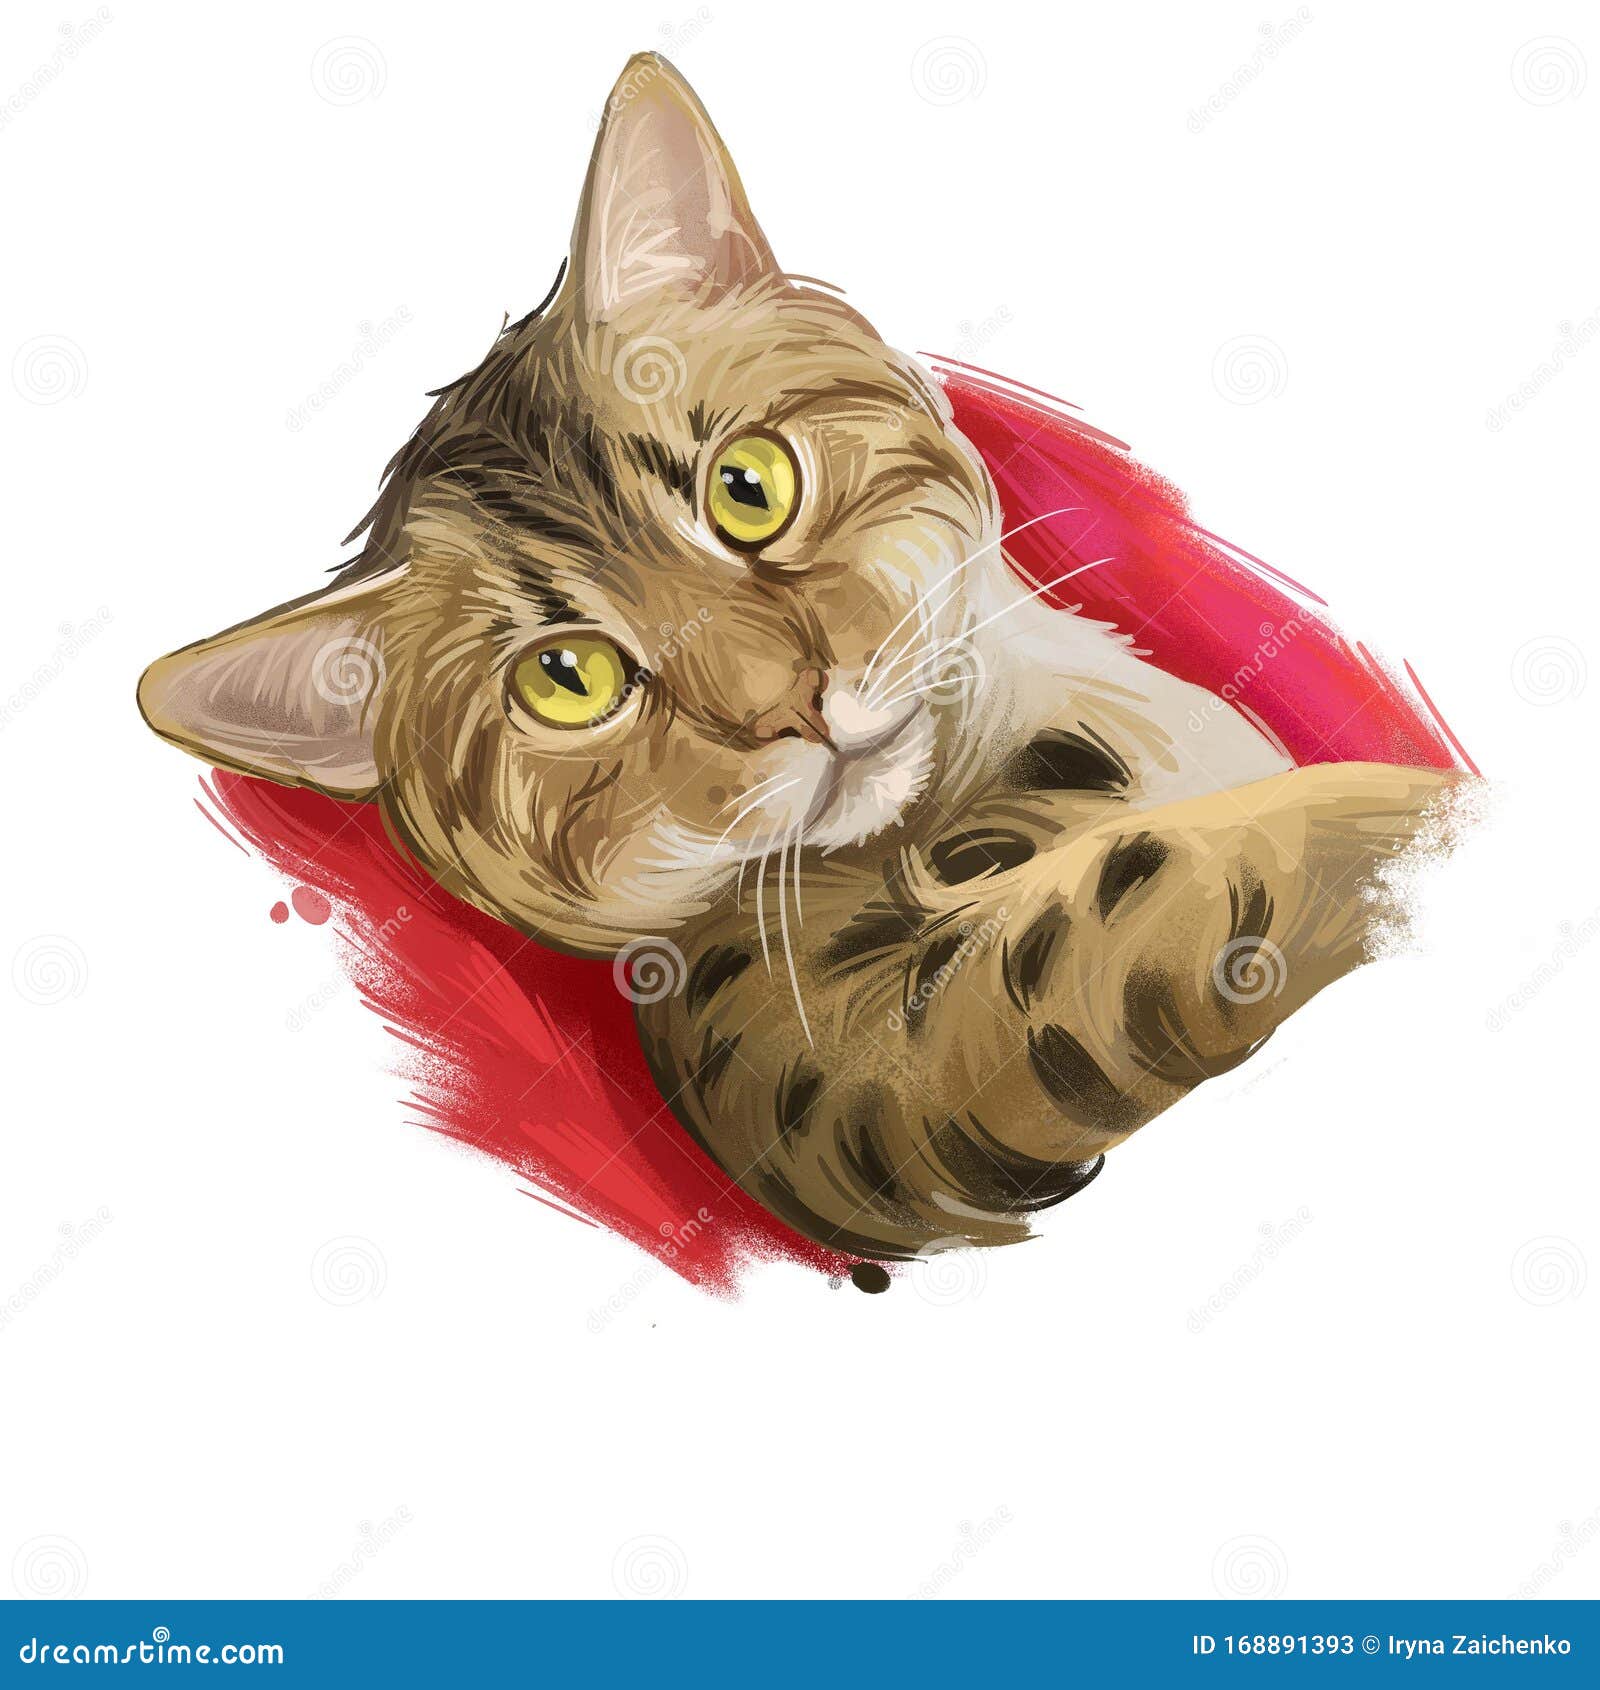 Ocicat Domestic Cat Resemble To Wild Cat Siamese And Abyssinian American Shorthair Digital Art Illustration Of Hand Drawn Kitty Stock Illustration Illustration Of Fluffy Friendly